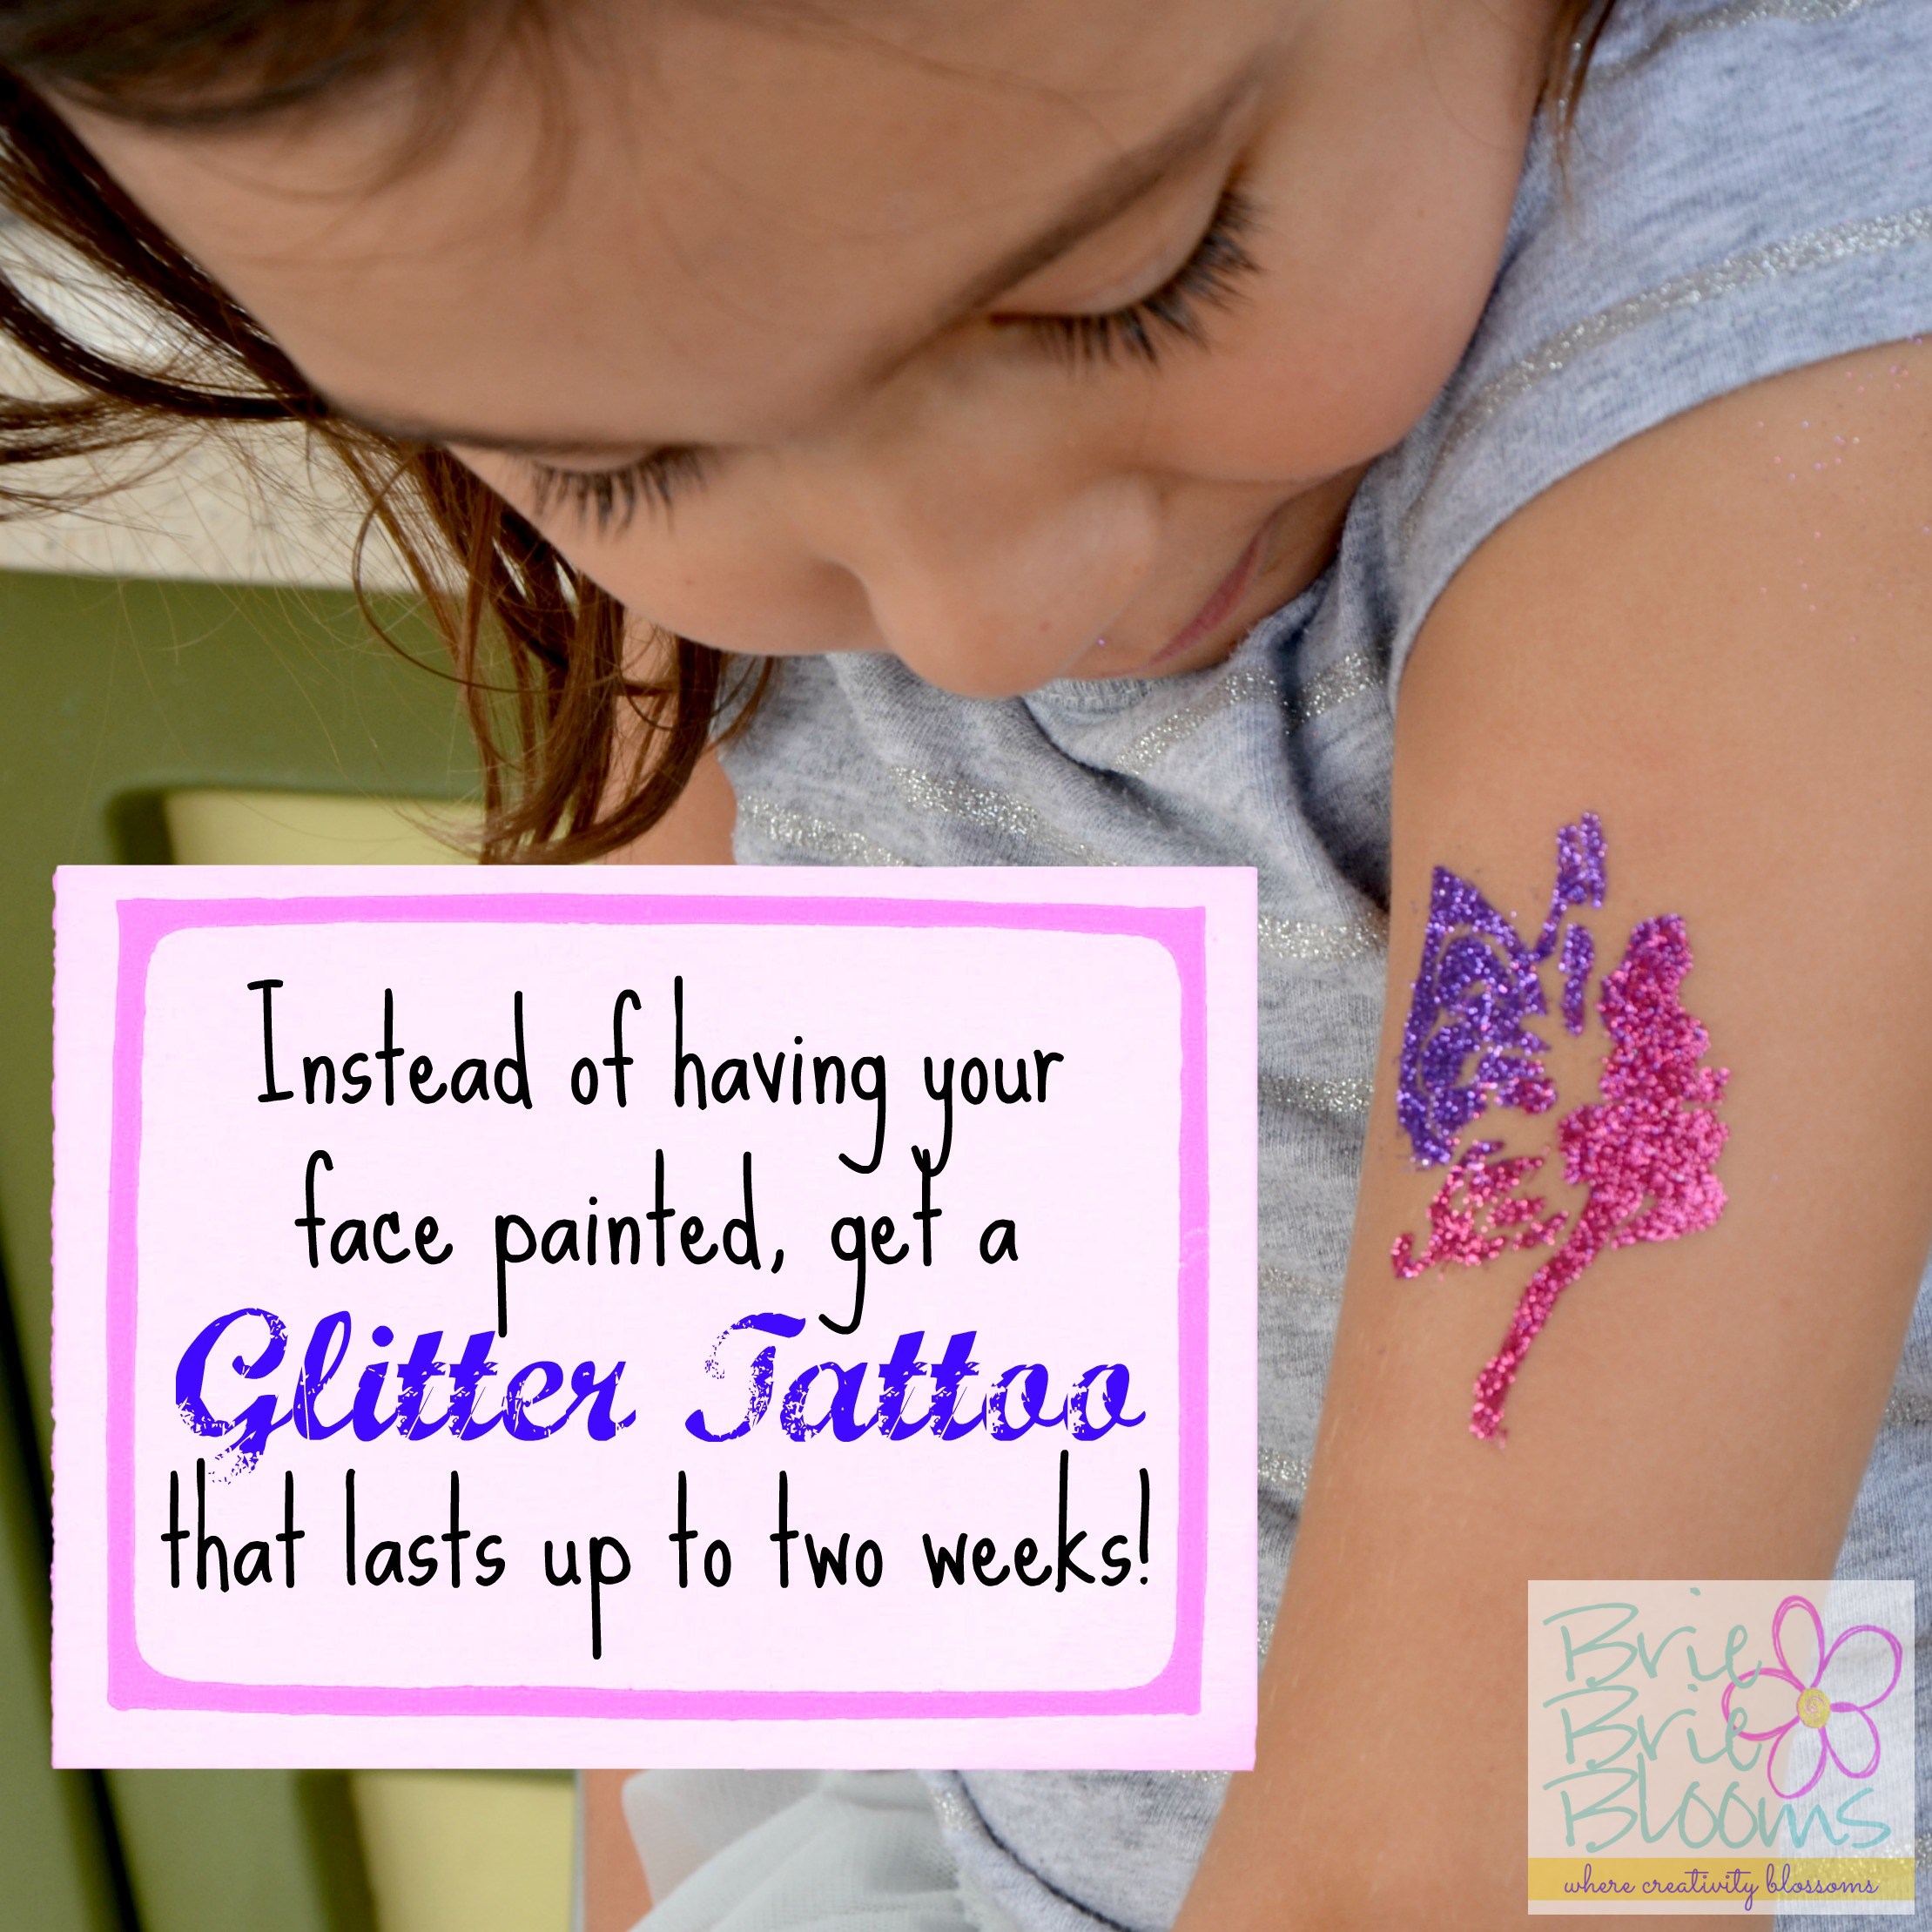 Glitter tattoos instead of face painting